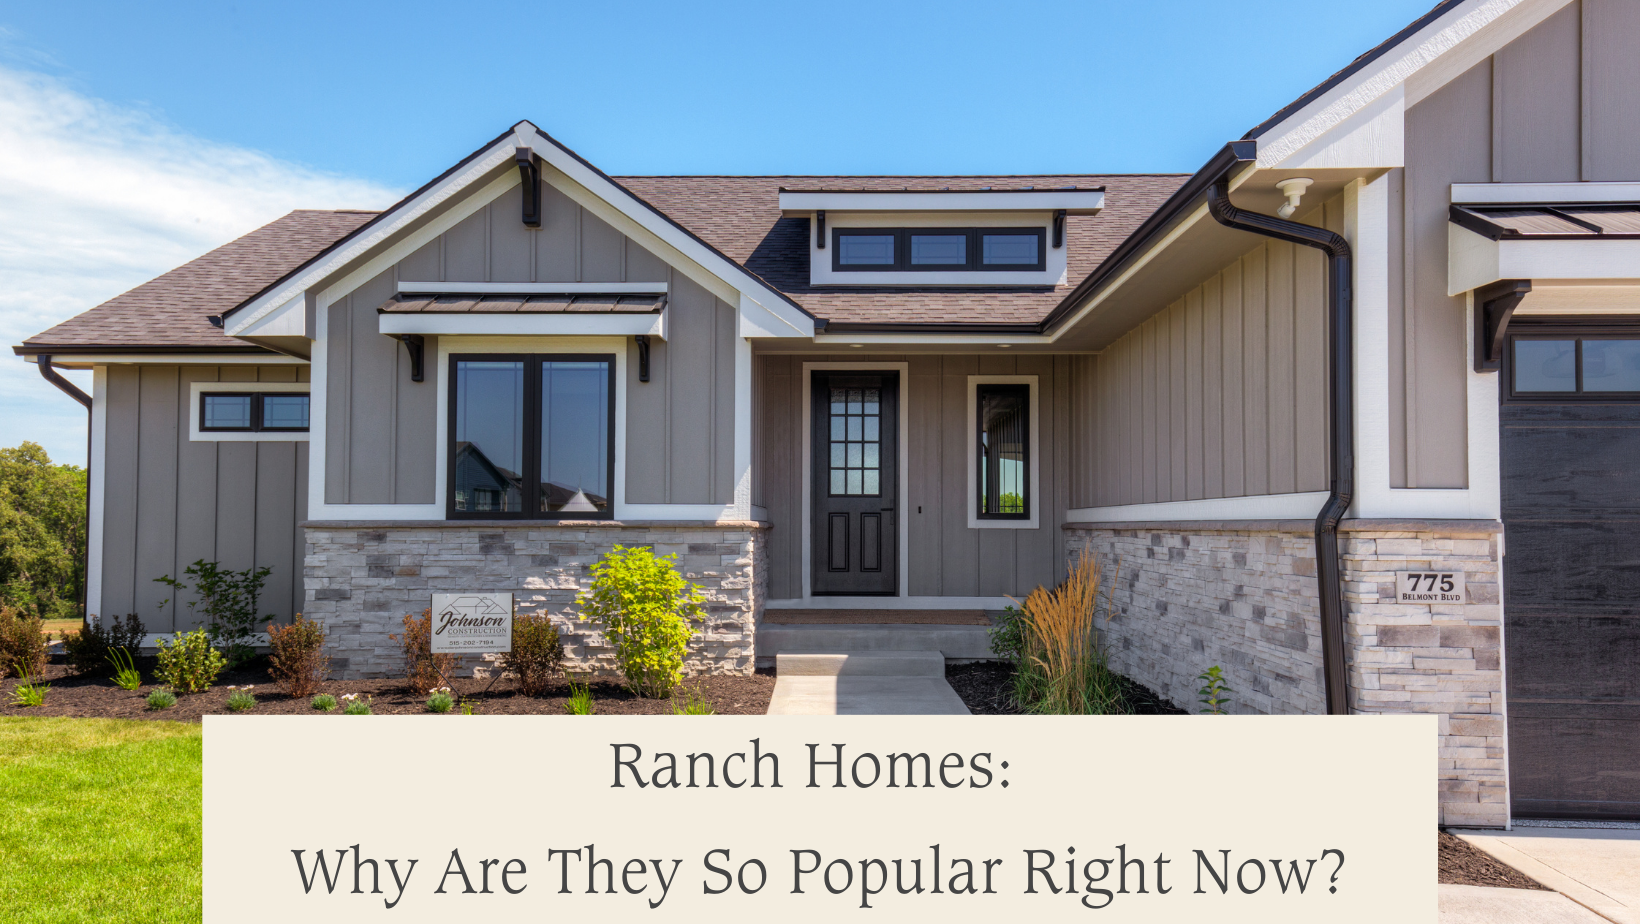 Ranch Homes: Why Are They So Popular Right Now?